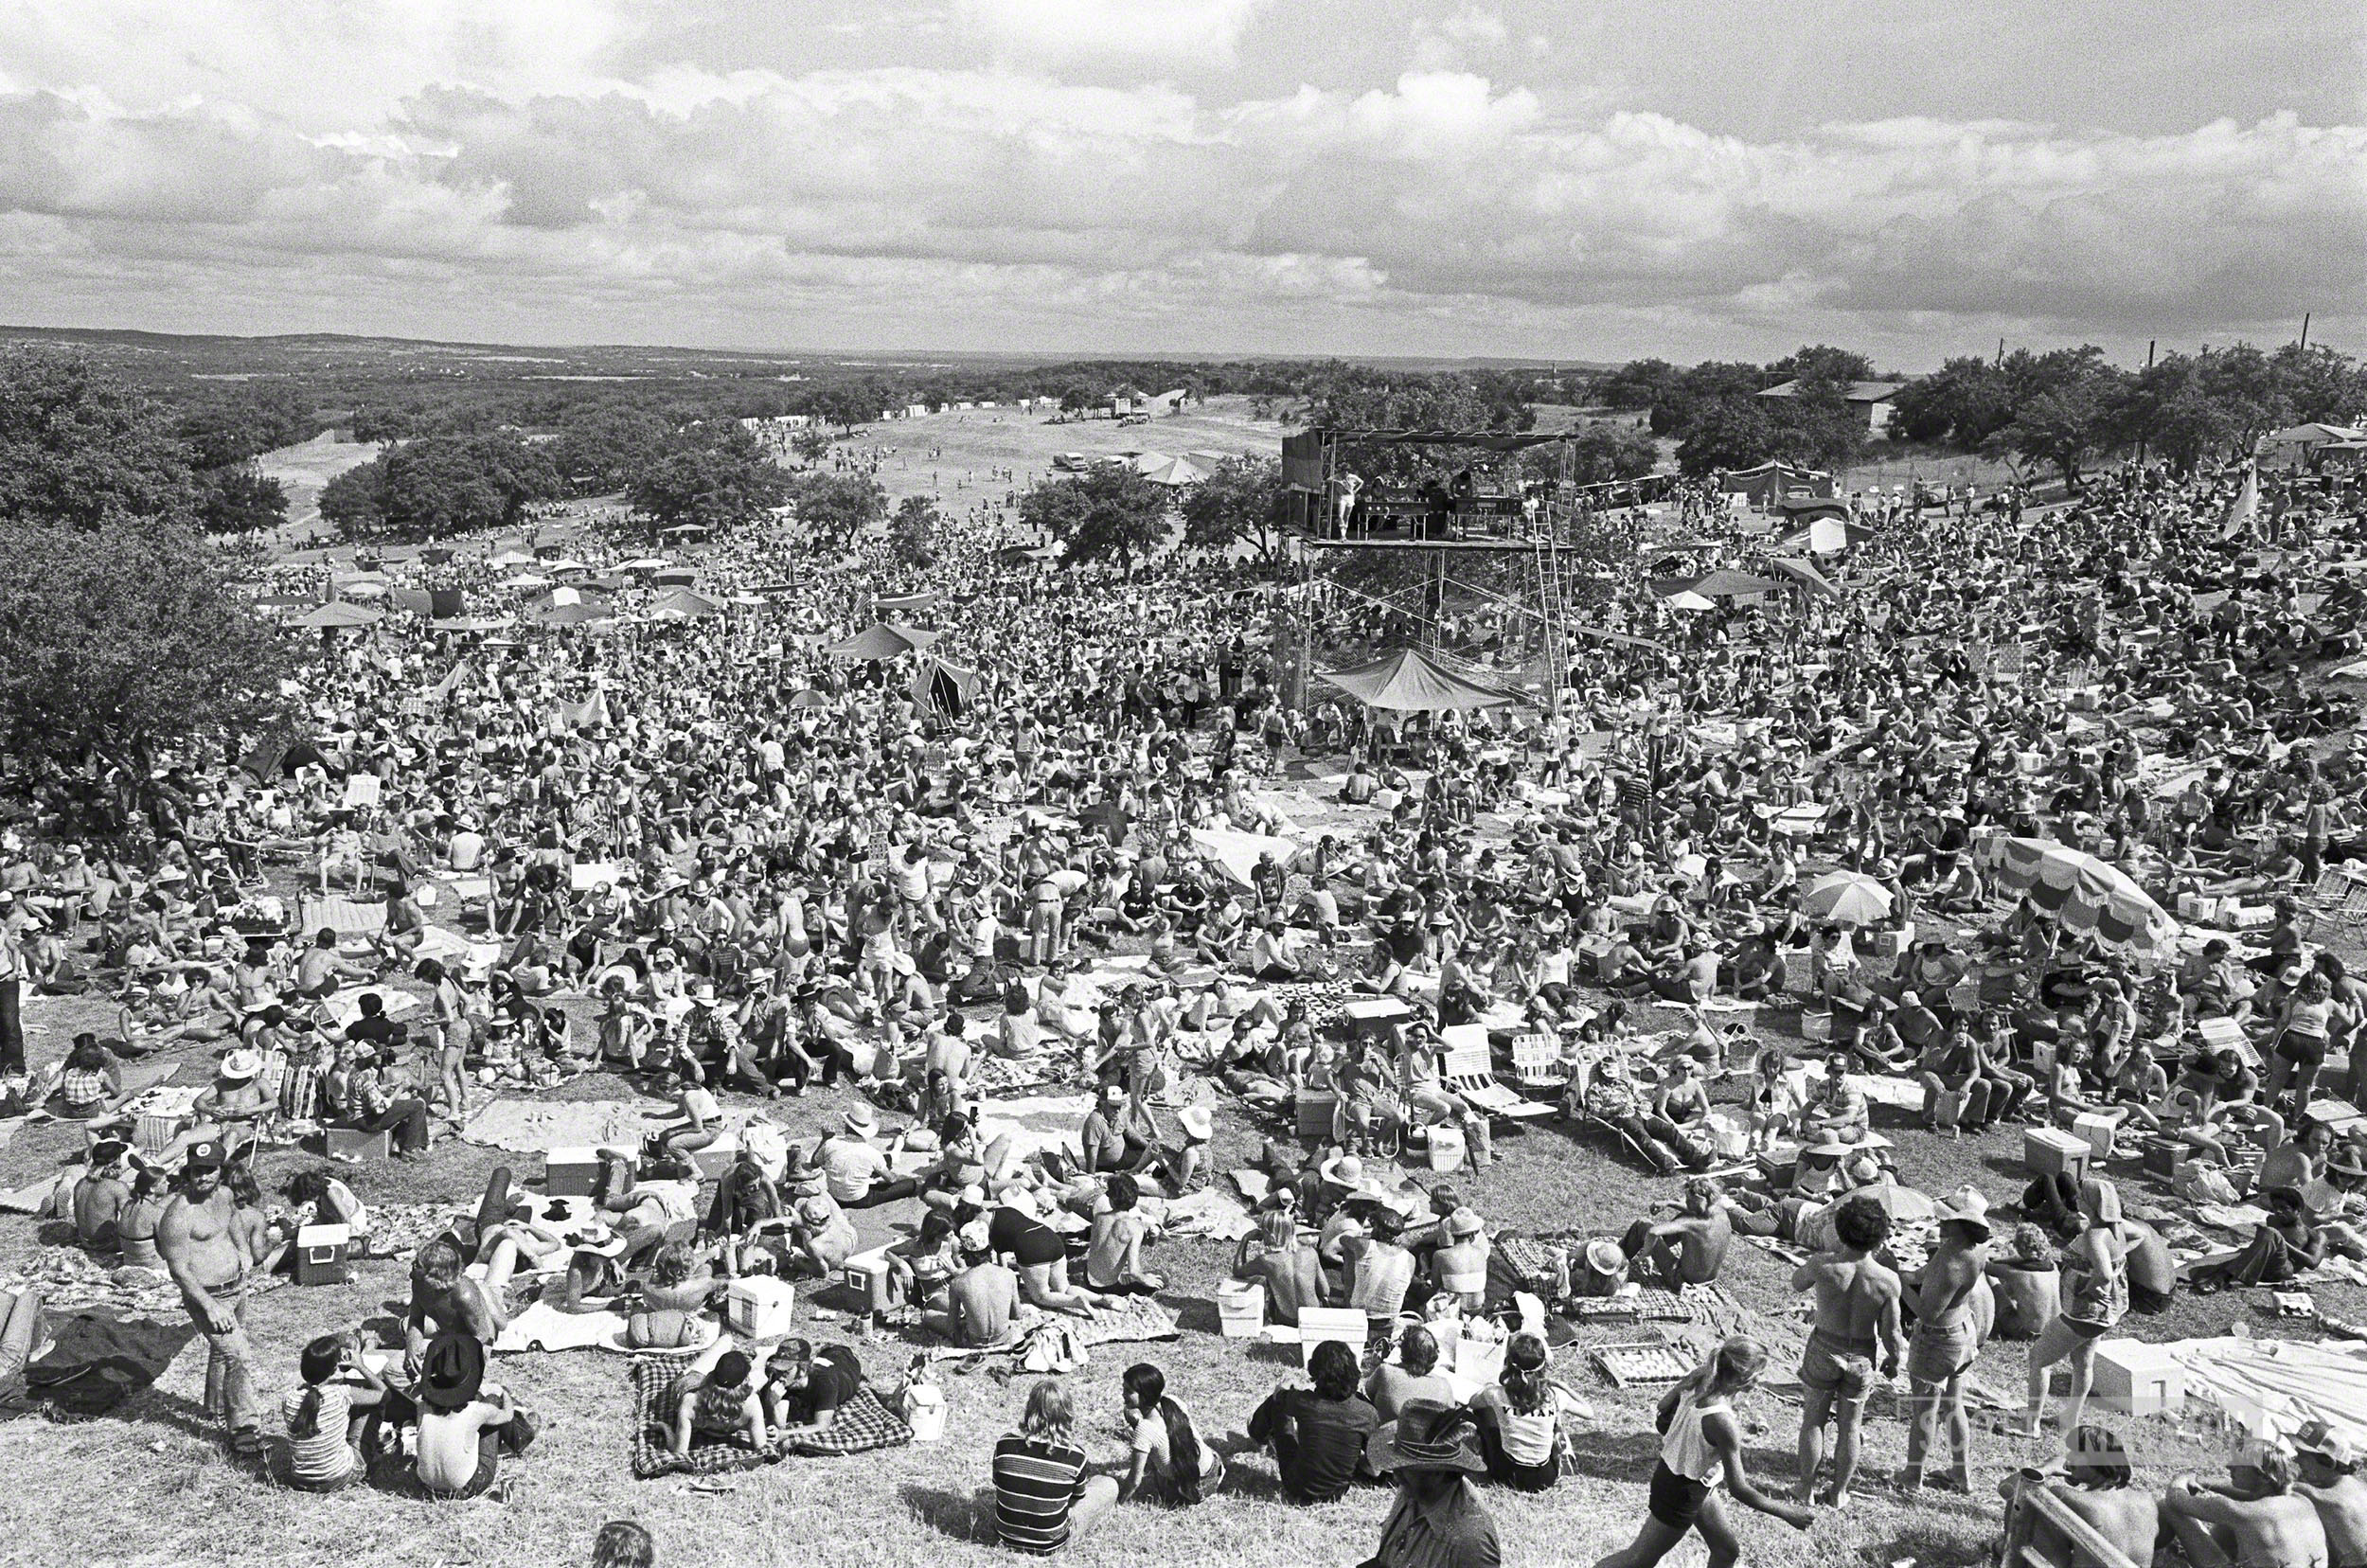 1979 Willie Nelson's 4th of July Picnic audience